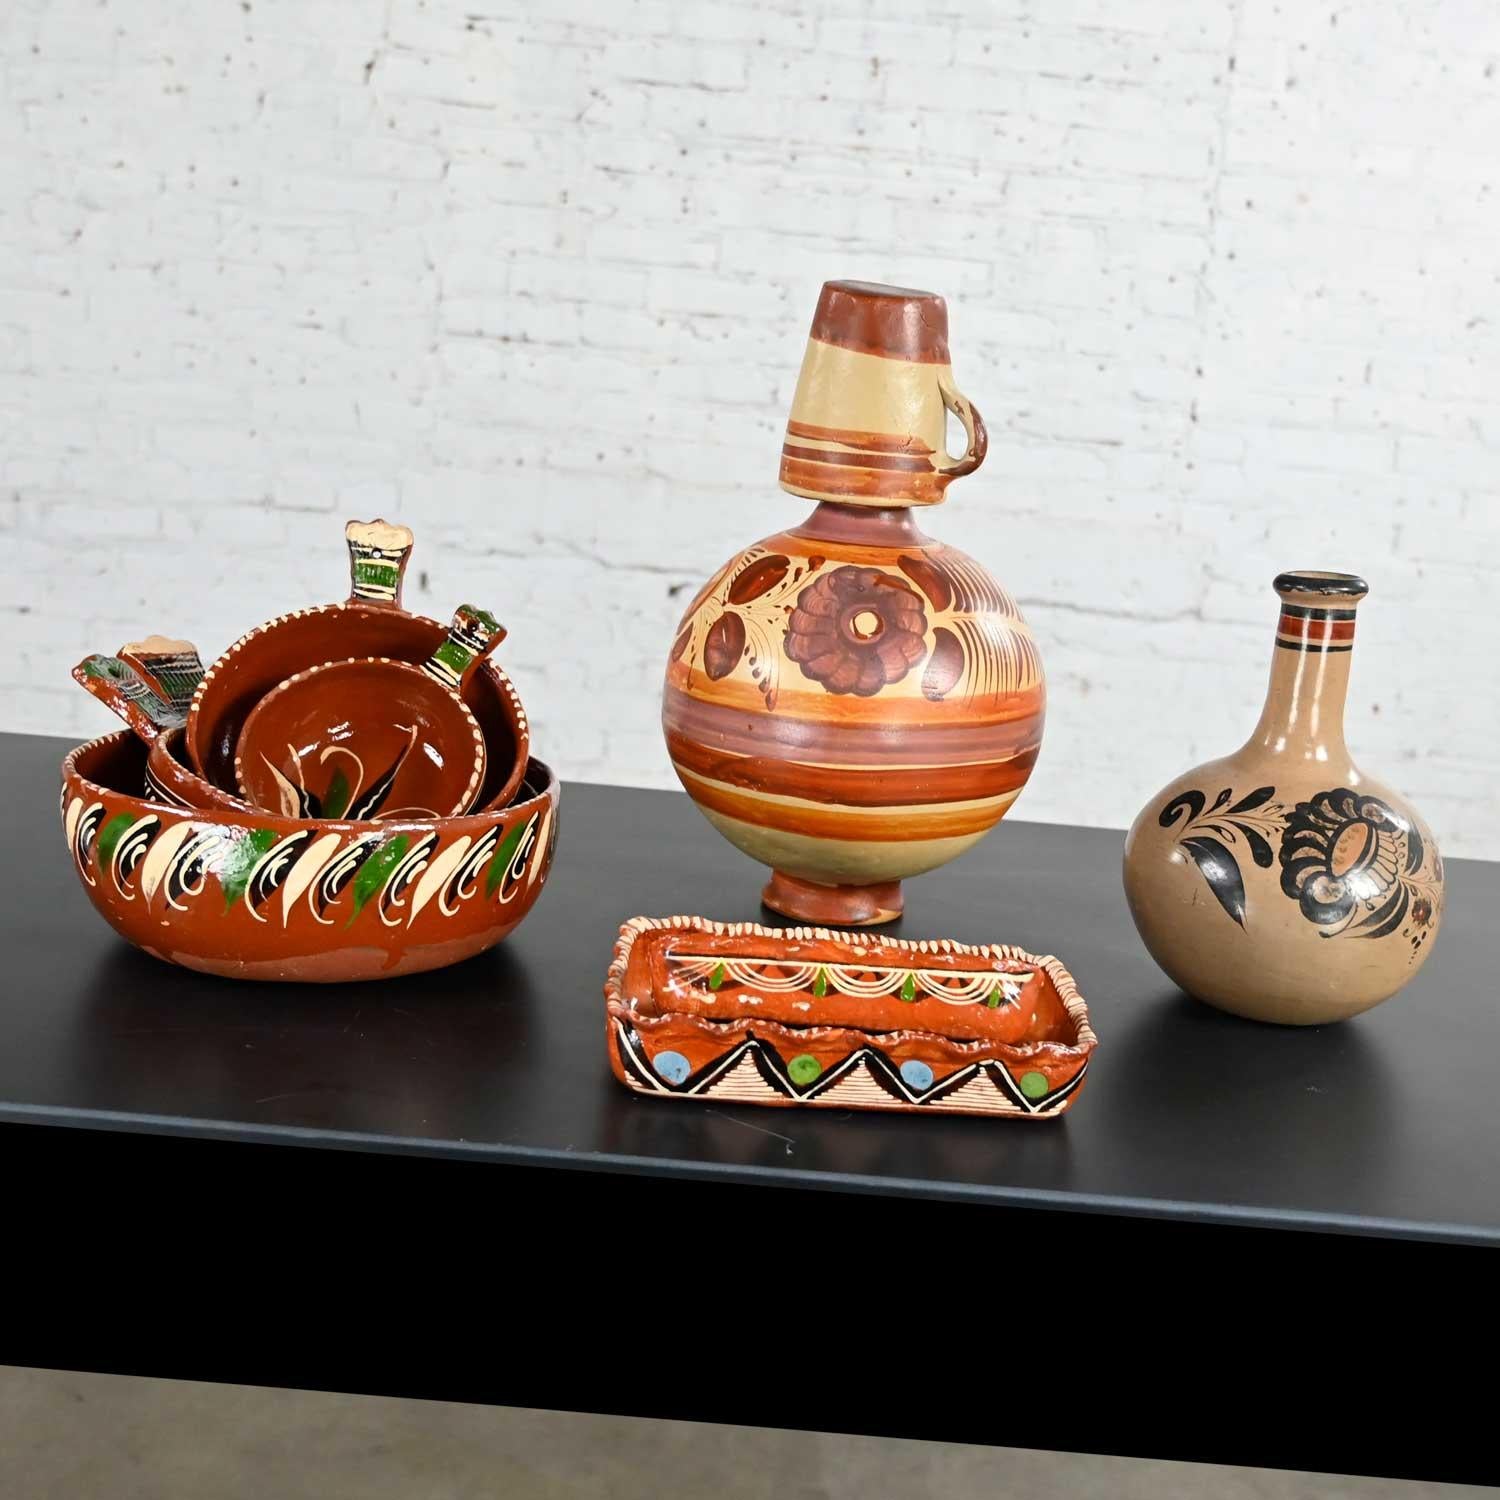 Fabulous selection of vintage Mexican pottery including four nesting bowls with handles, two nesting baking dishes, one carafe & cup, and one bottle or vase. Beautiful condition, keeping in mind that these are vintage and not new so will have signs